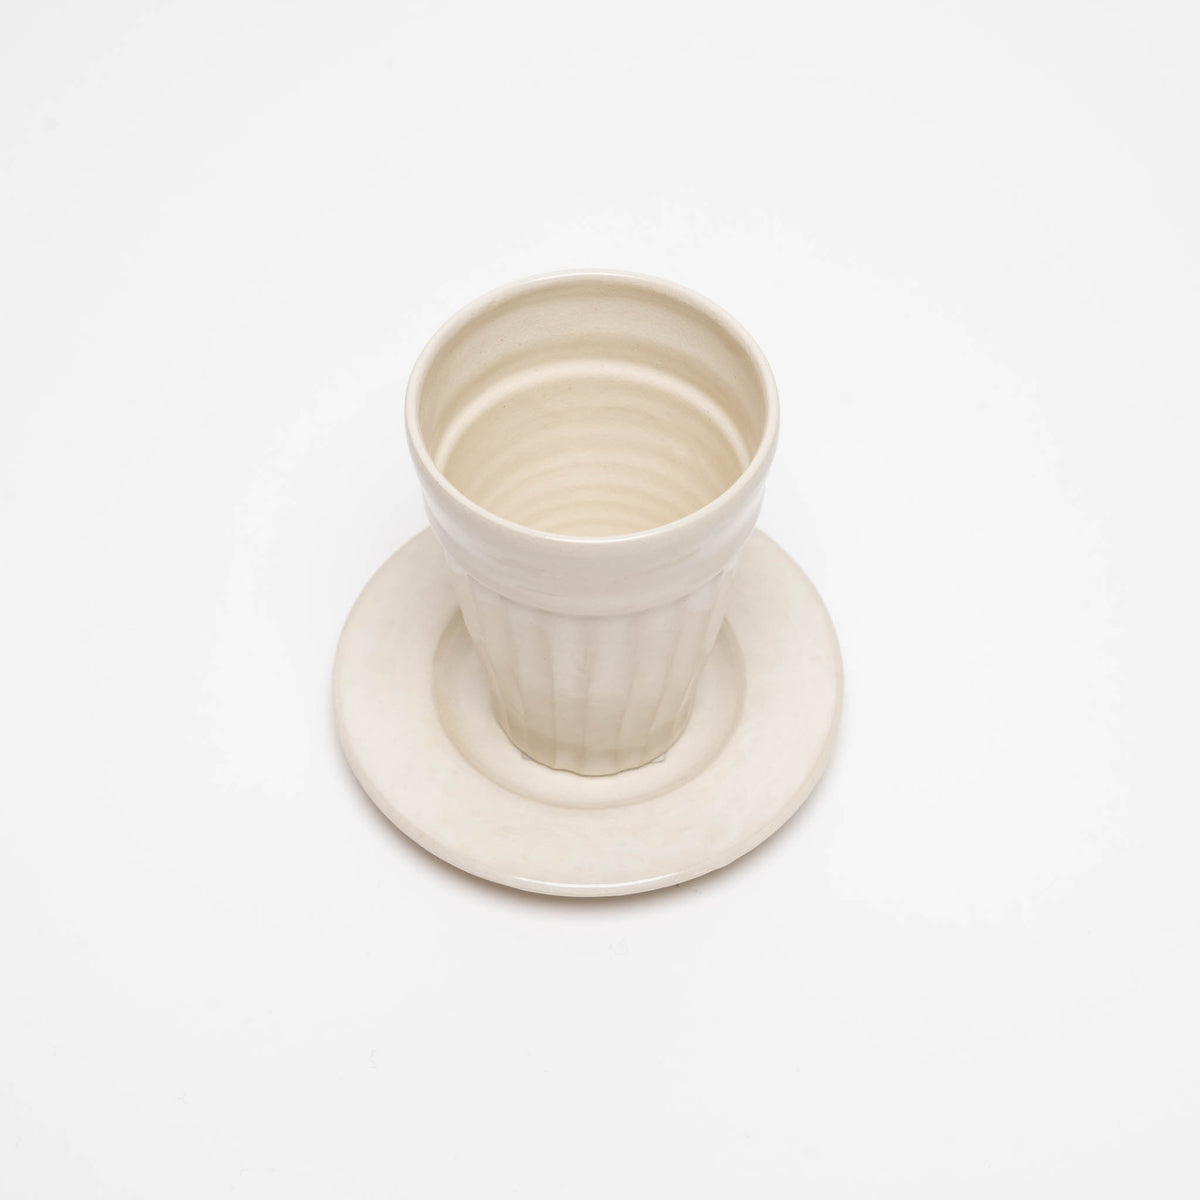 Stoneware cup with grooves